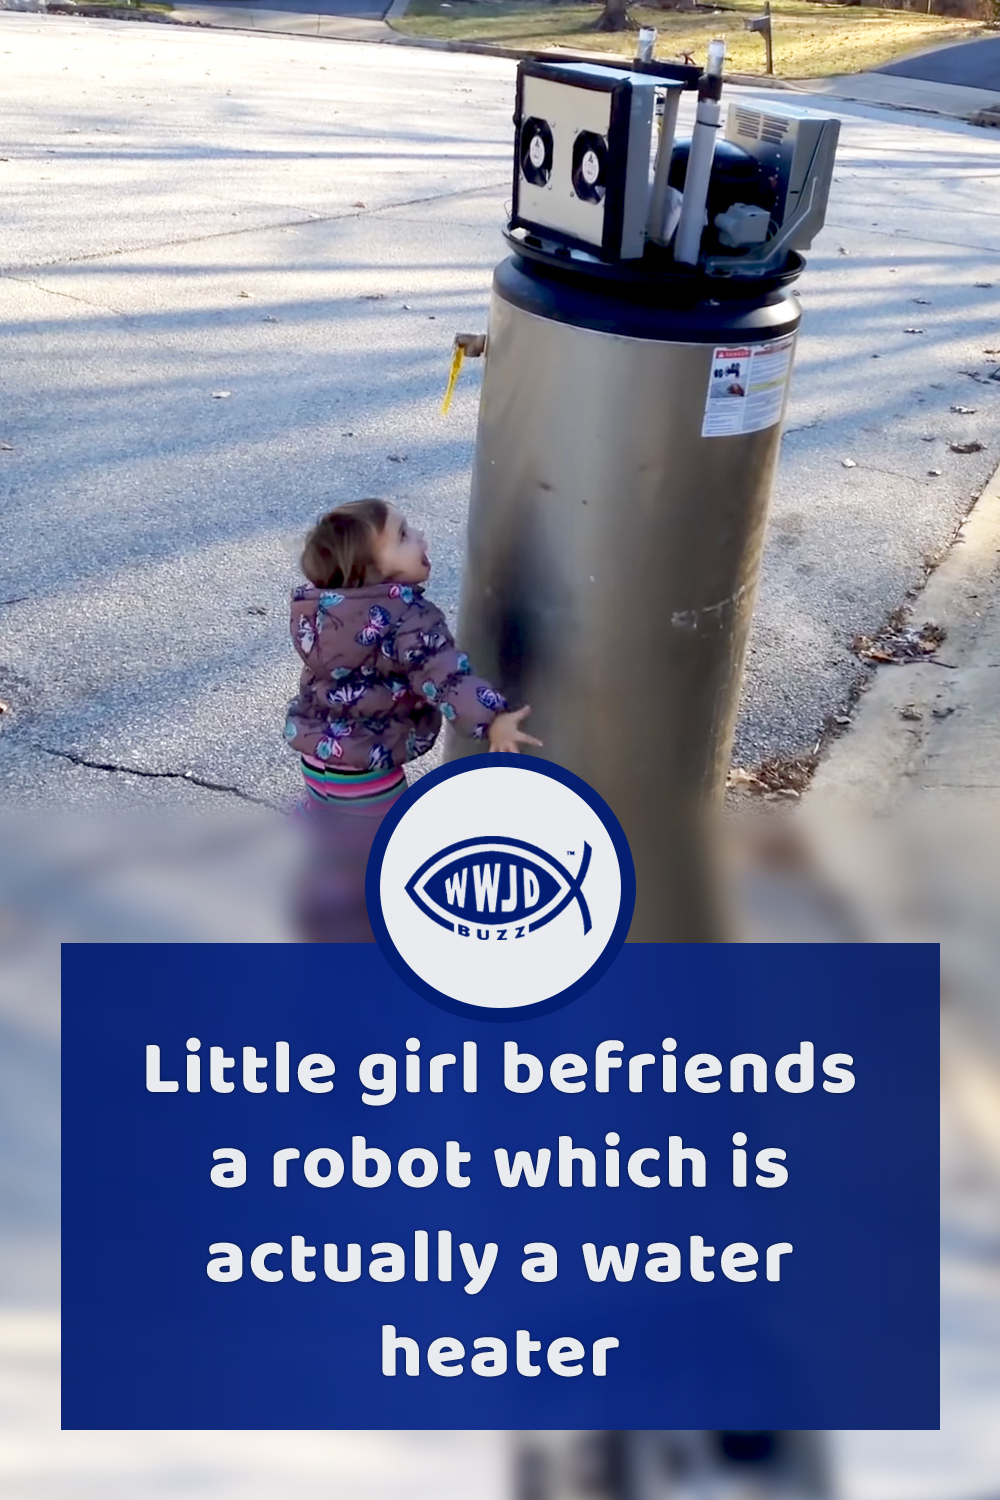 Little girl befriends a robot which is actually a water heater